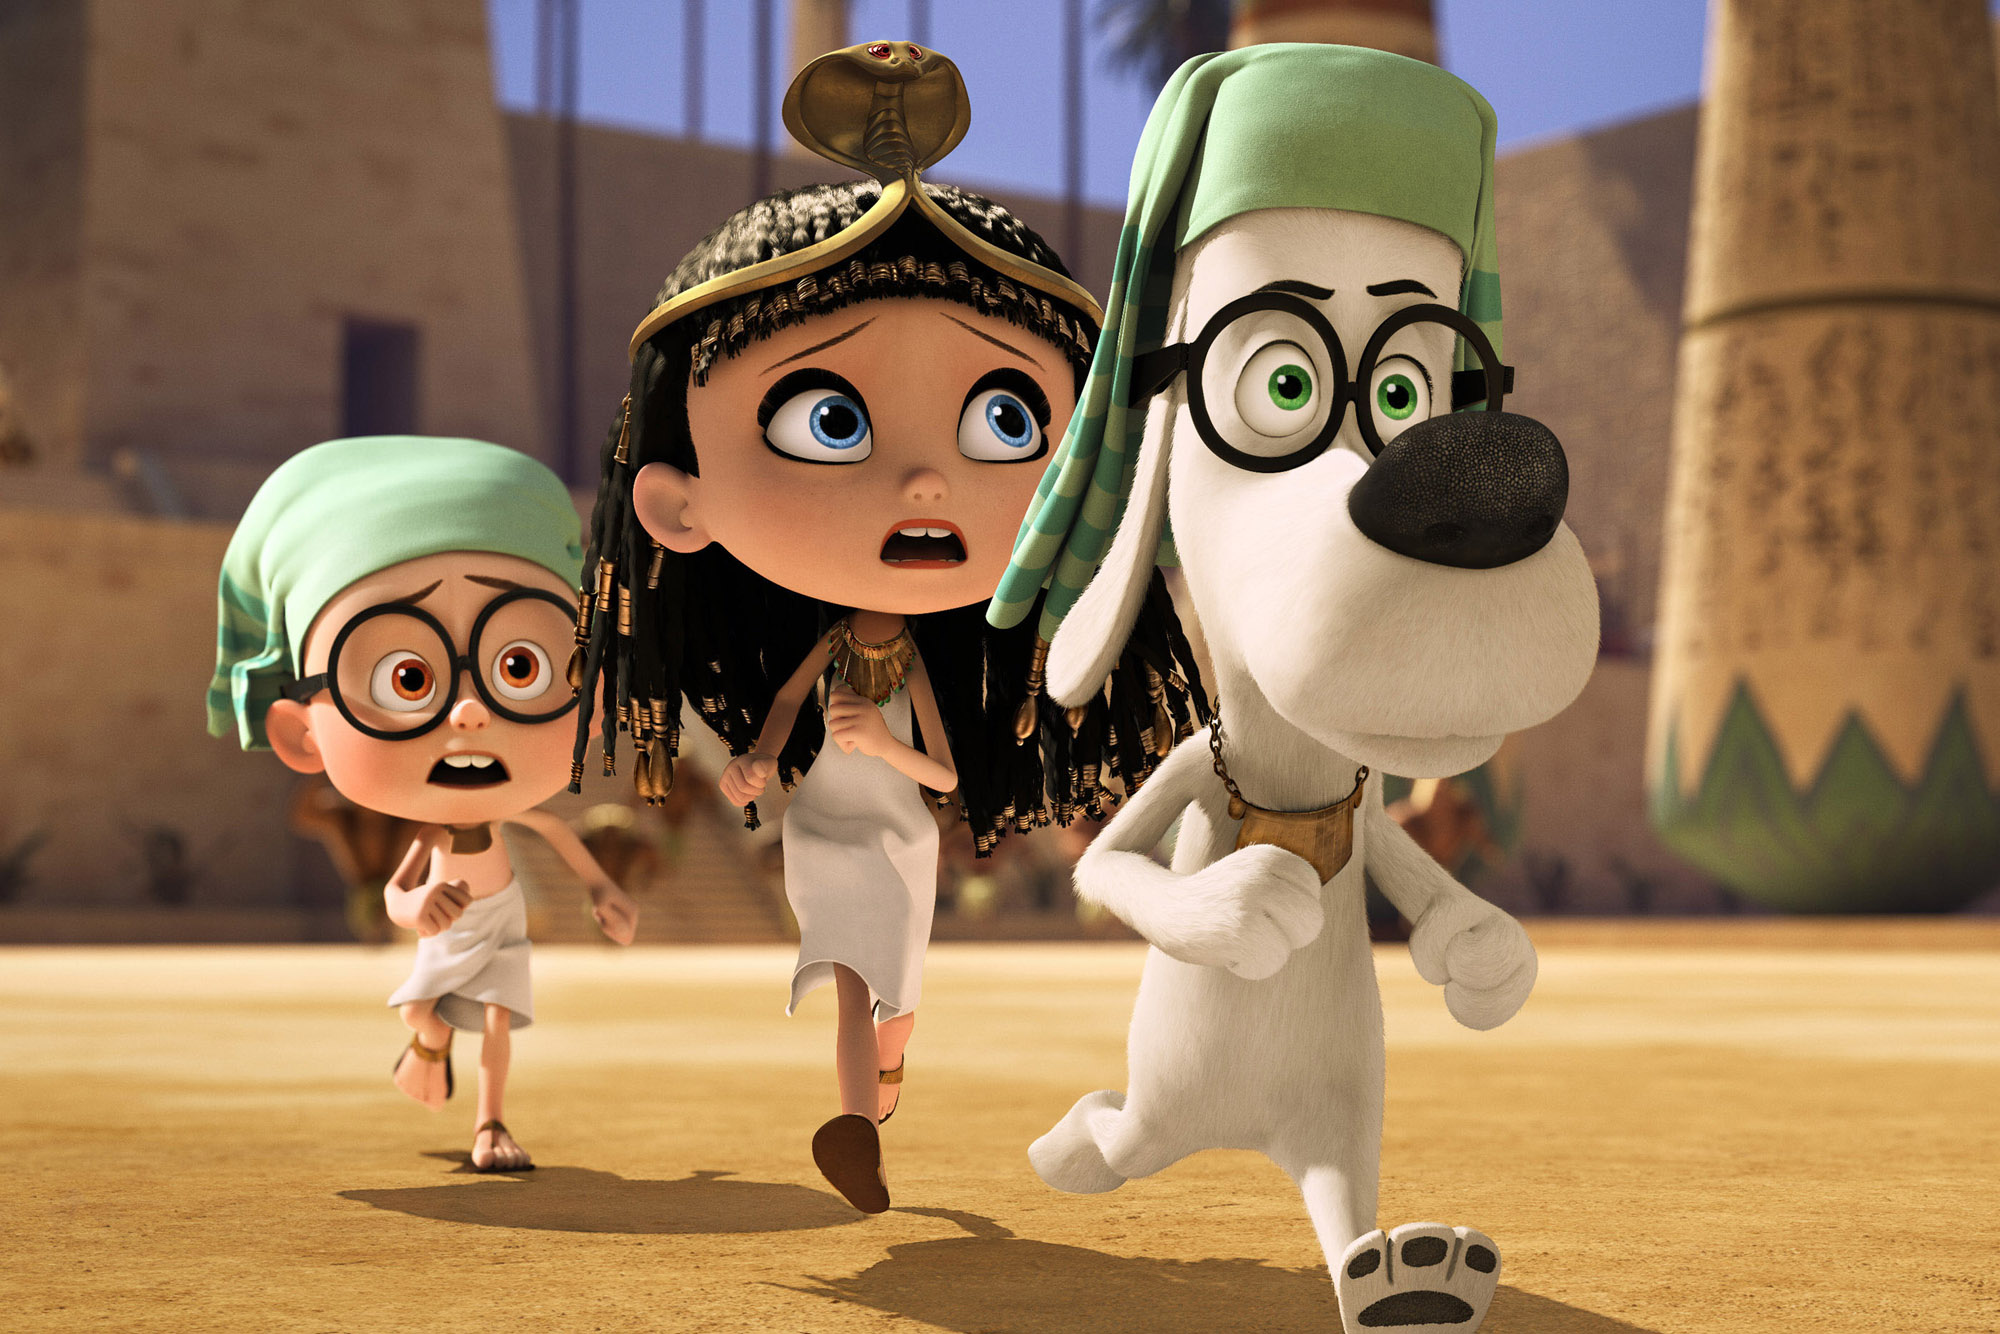 This image released by DreamWorks Animation shows Sherman, voiced by Max Charles, from left, Penny, voiced by Ariel Winter, and Mr. Peabody, voiced by Ty Burell, in a scene from 